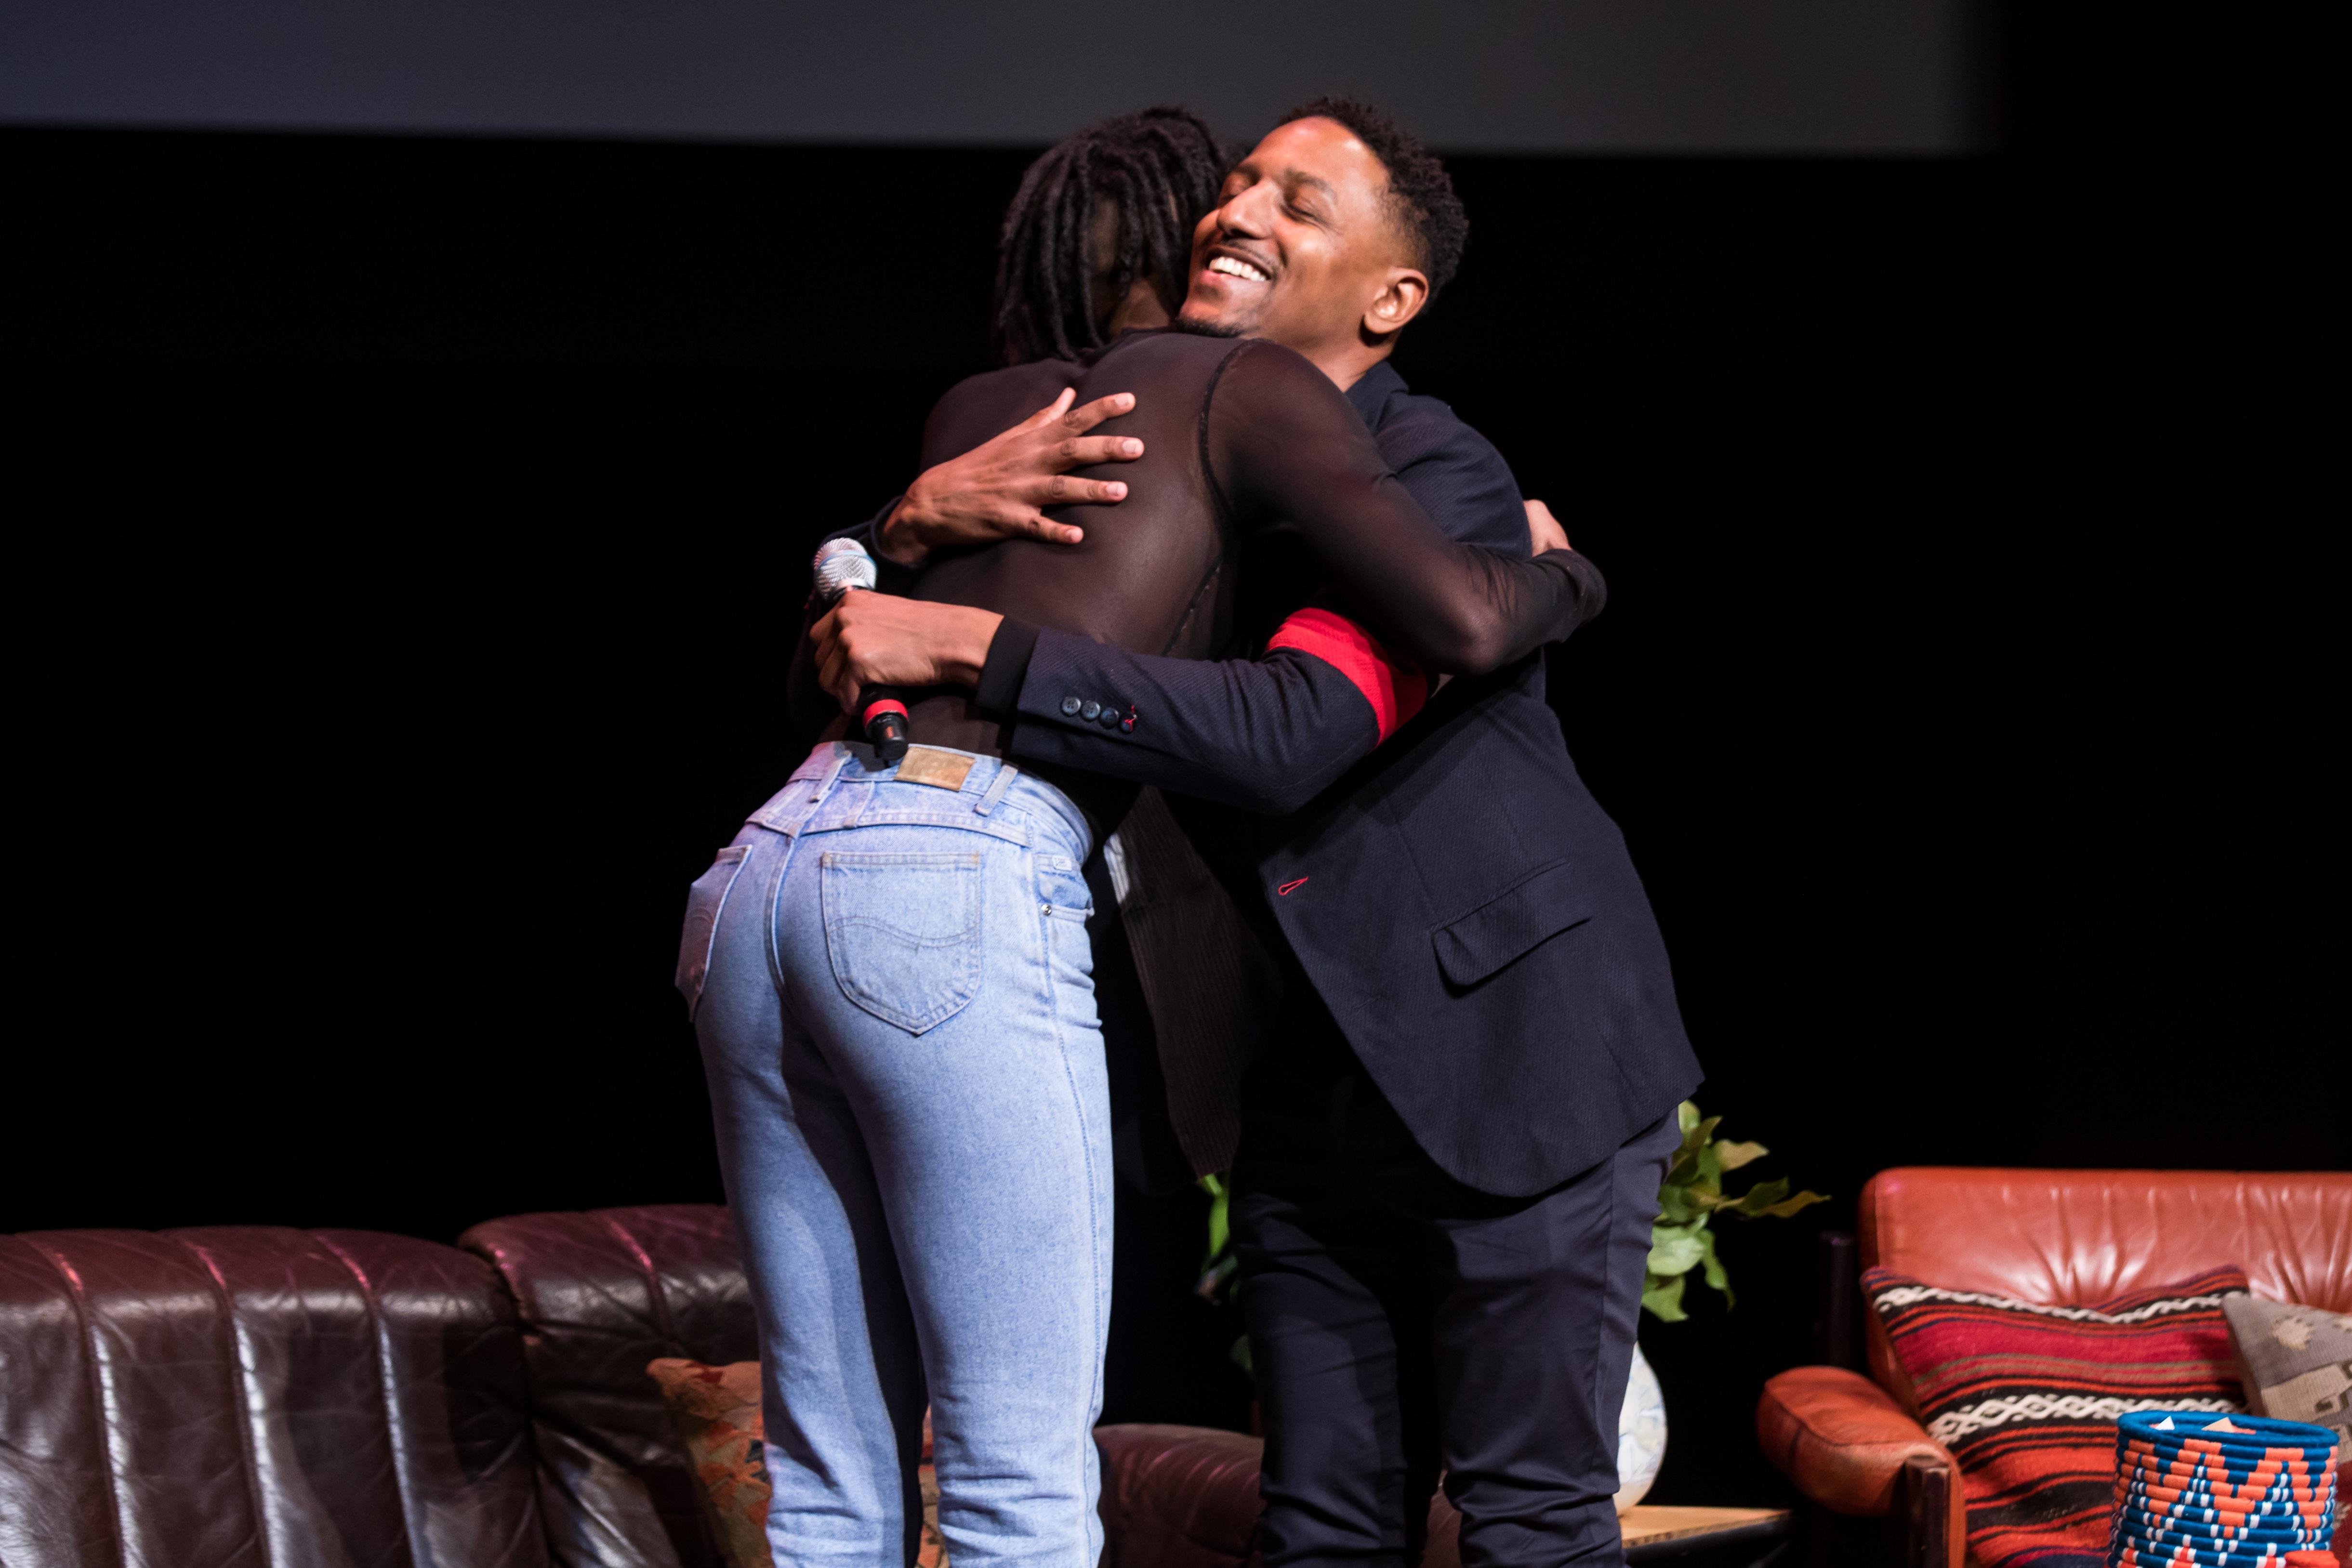 Two people embrace on a theater set. One holds a microphone.